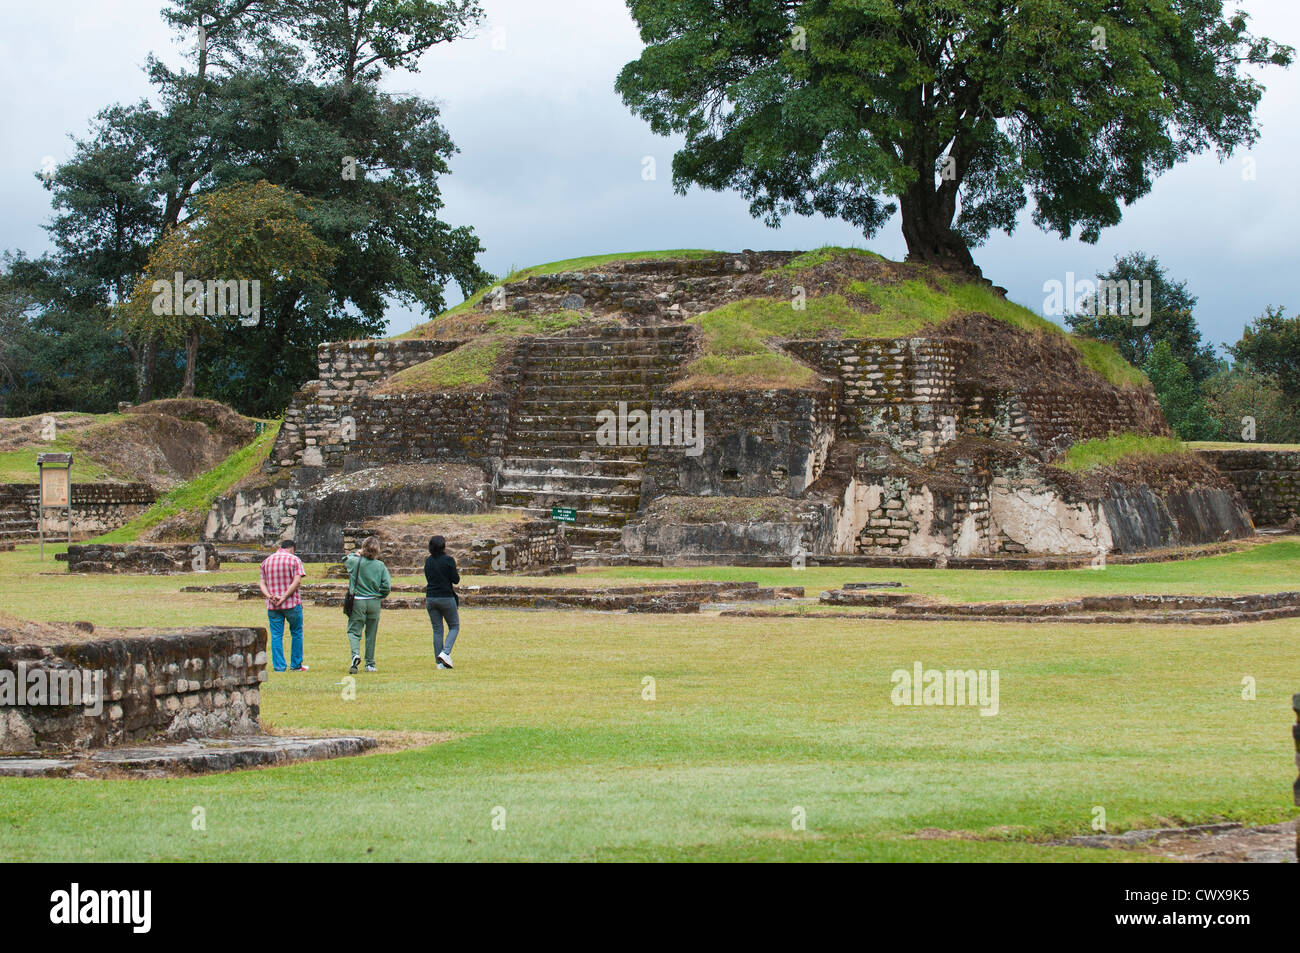 The Mayan ruins of Iximche Archeological National Monument Park near Tecpan, Guatemala, Central America. Stock Photo